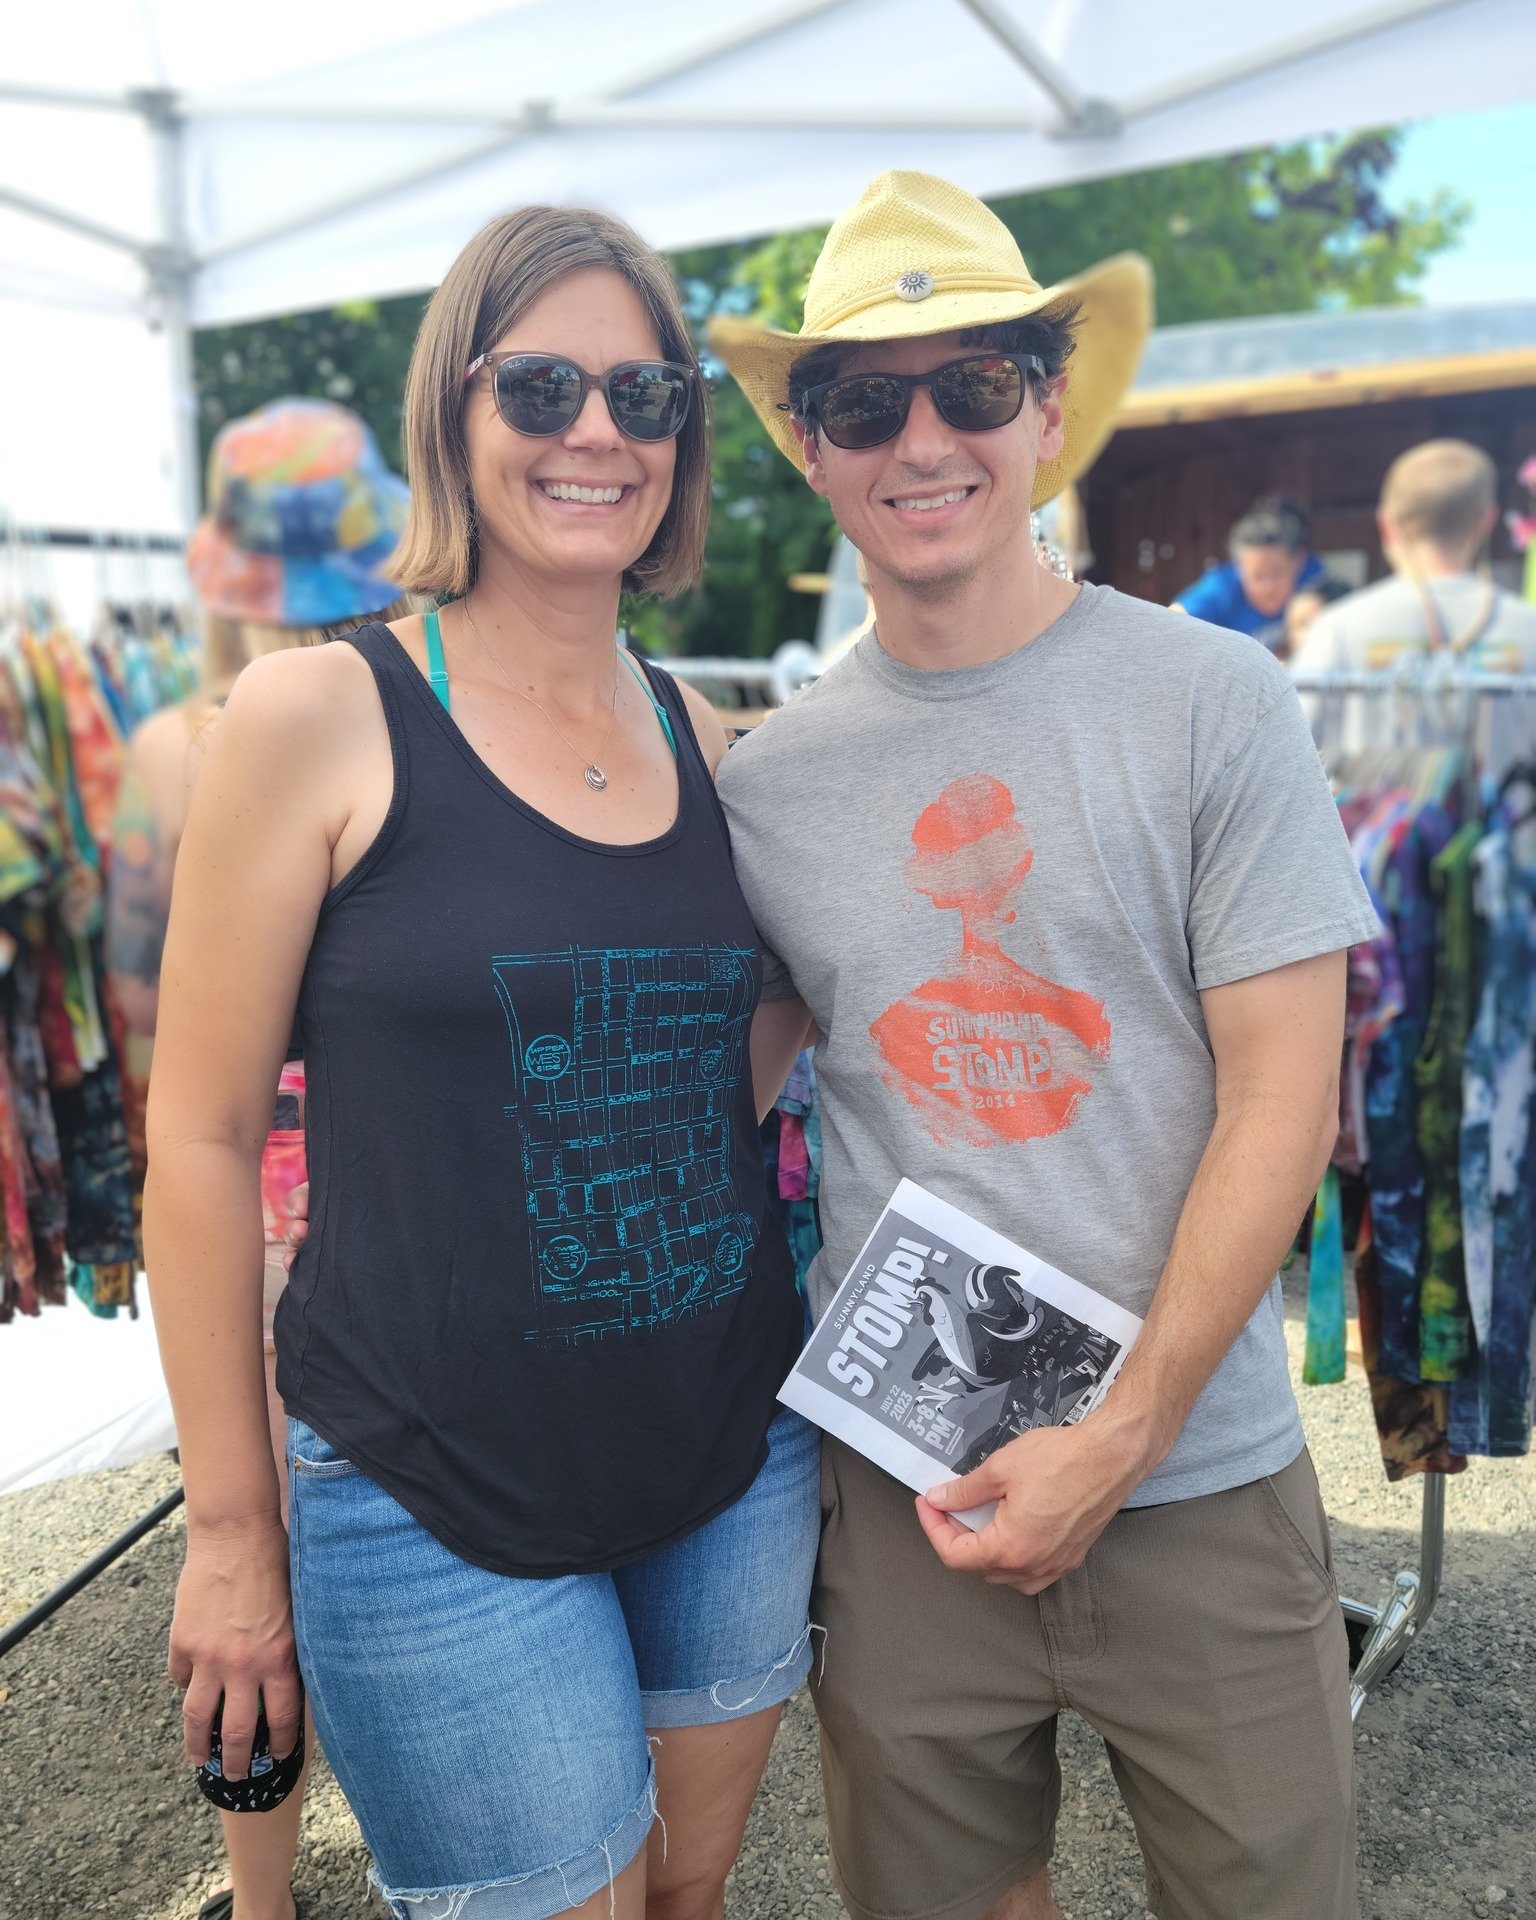 How many years of Stomp shirts do you have in your closet?! 👕 Show us your swag collection and tag @sunnylandstomp 🐓☀️ We were thrilled to spot this duo donning 'vintage' Stomp shirts at the 2023 Stomp - A perfect outfit for Stomp Saturday!

At thi